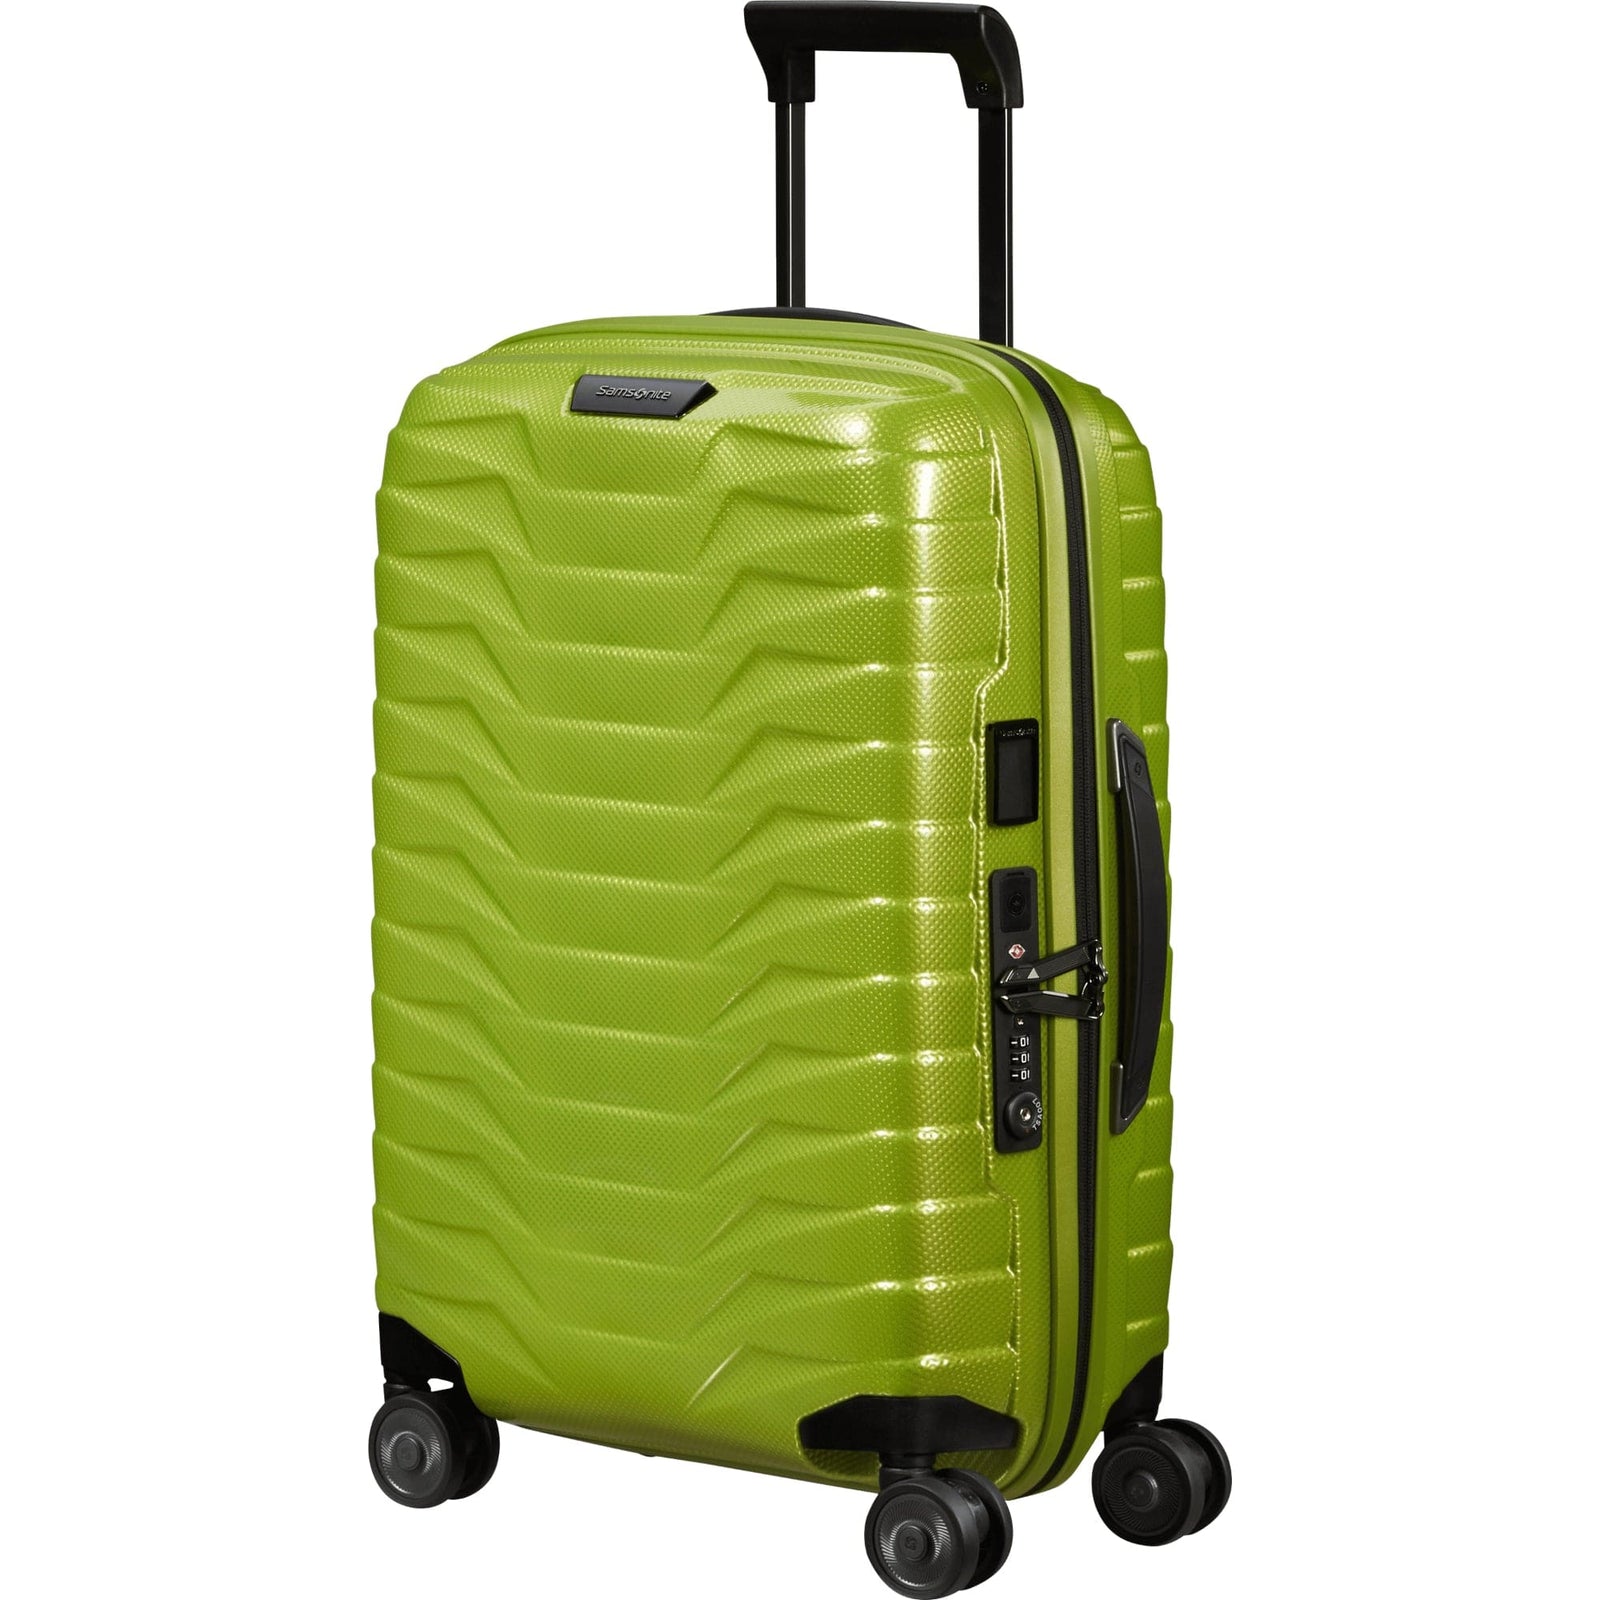 Samsonite Proxis Spinner expandable (4 wheels) 55cm in Lime